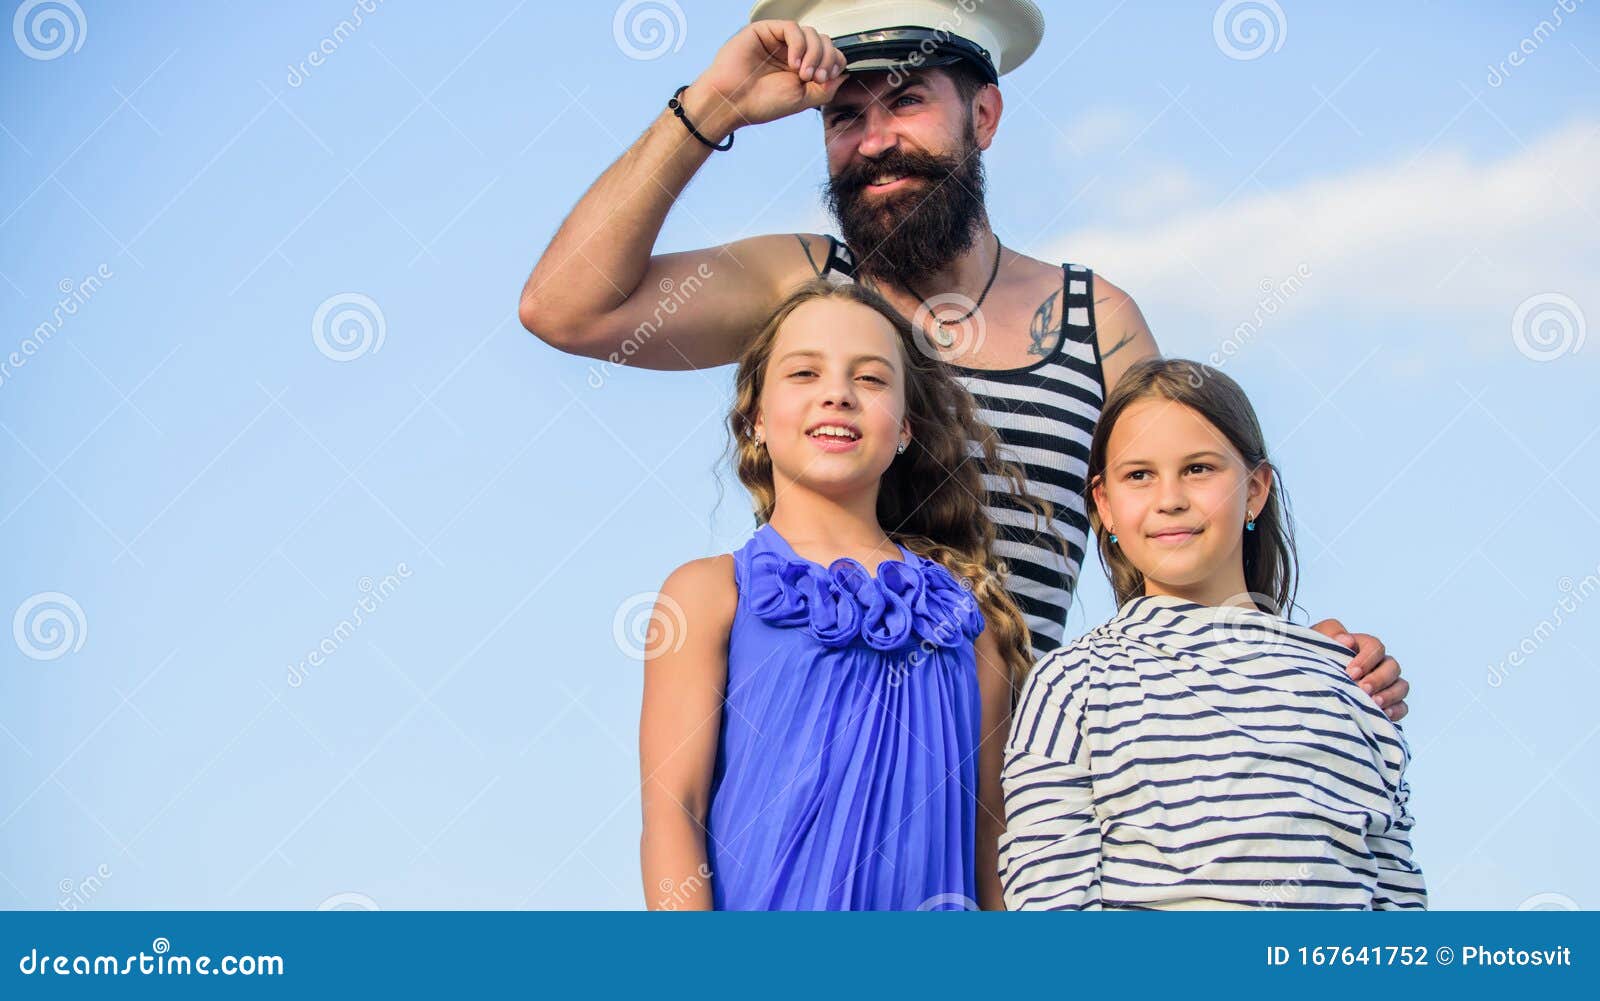 Dad Sailor And Daughters Outdoors. 